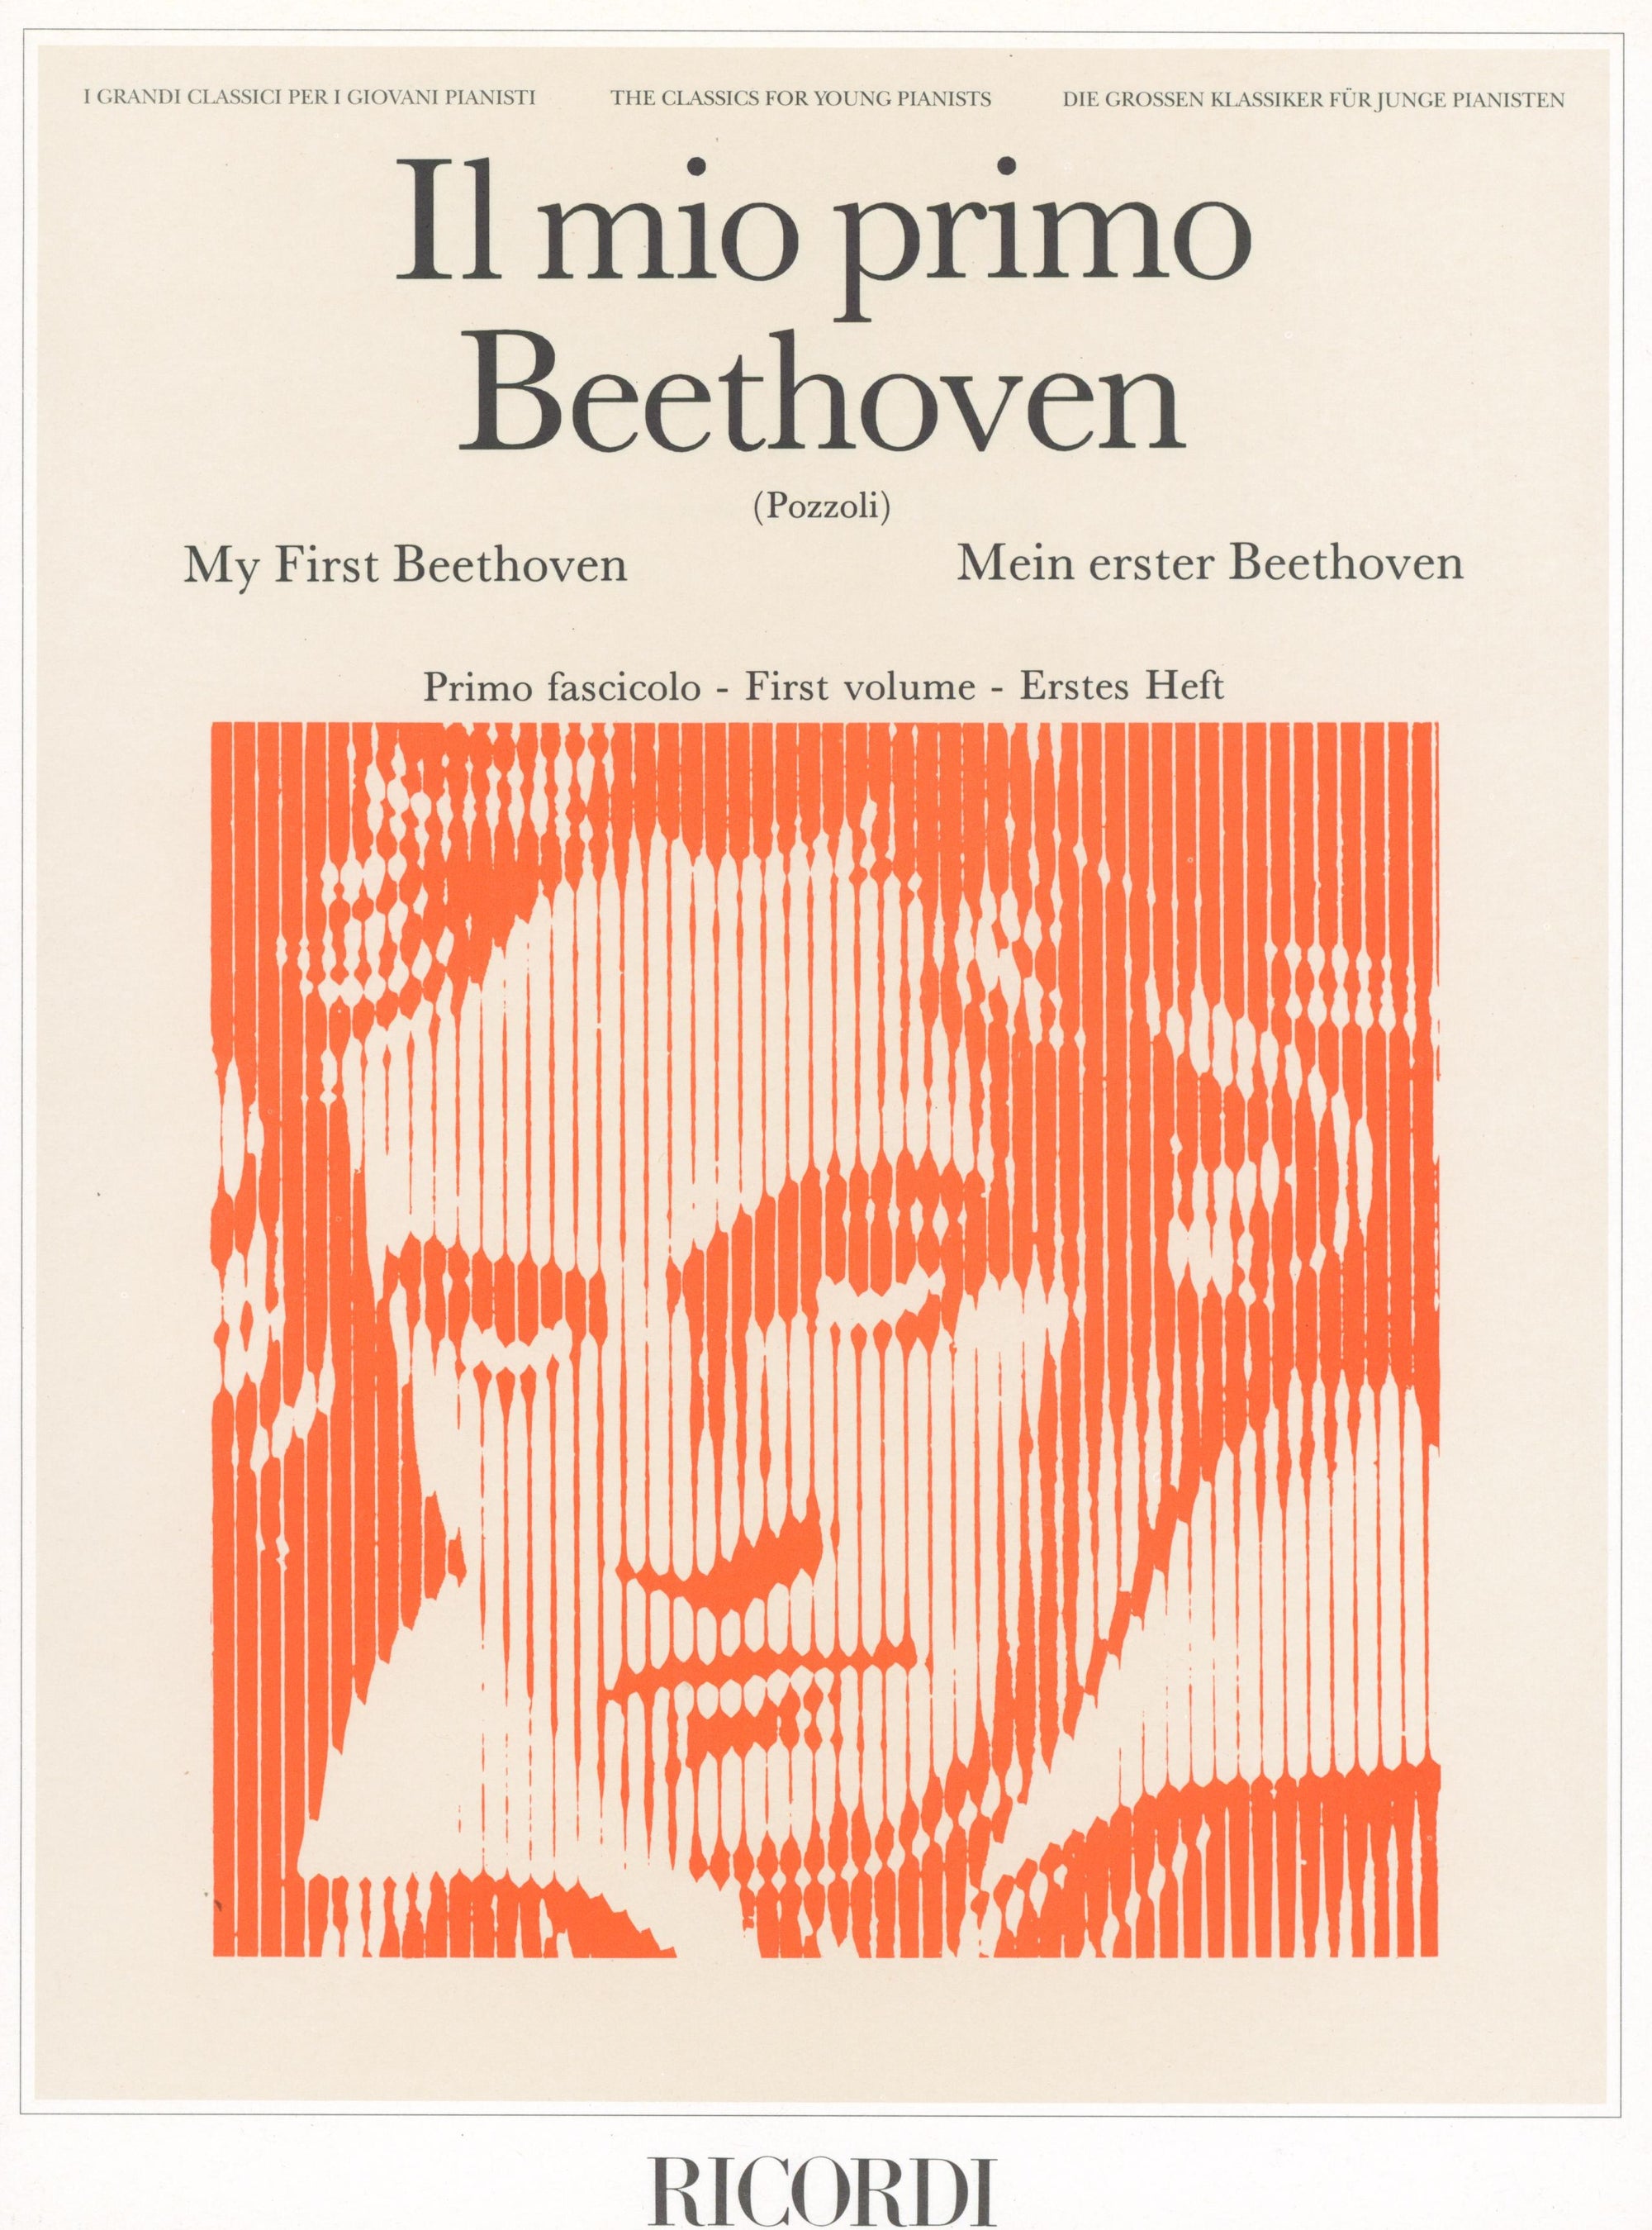 My First Beethoven - Volume 1